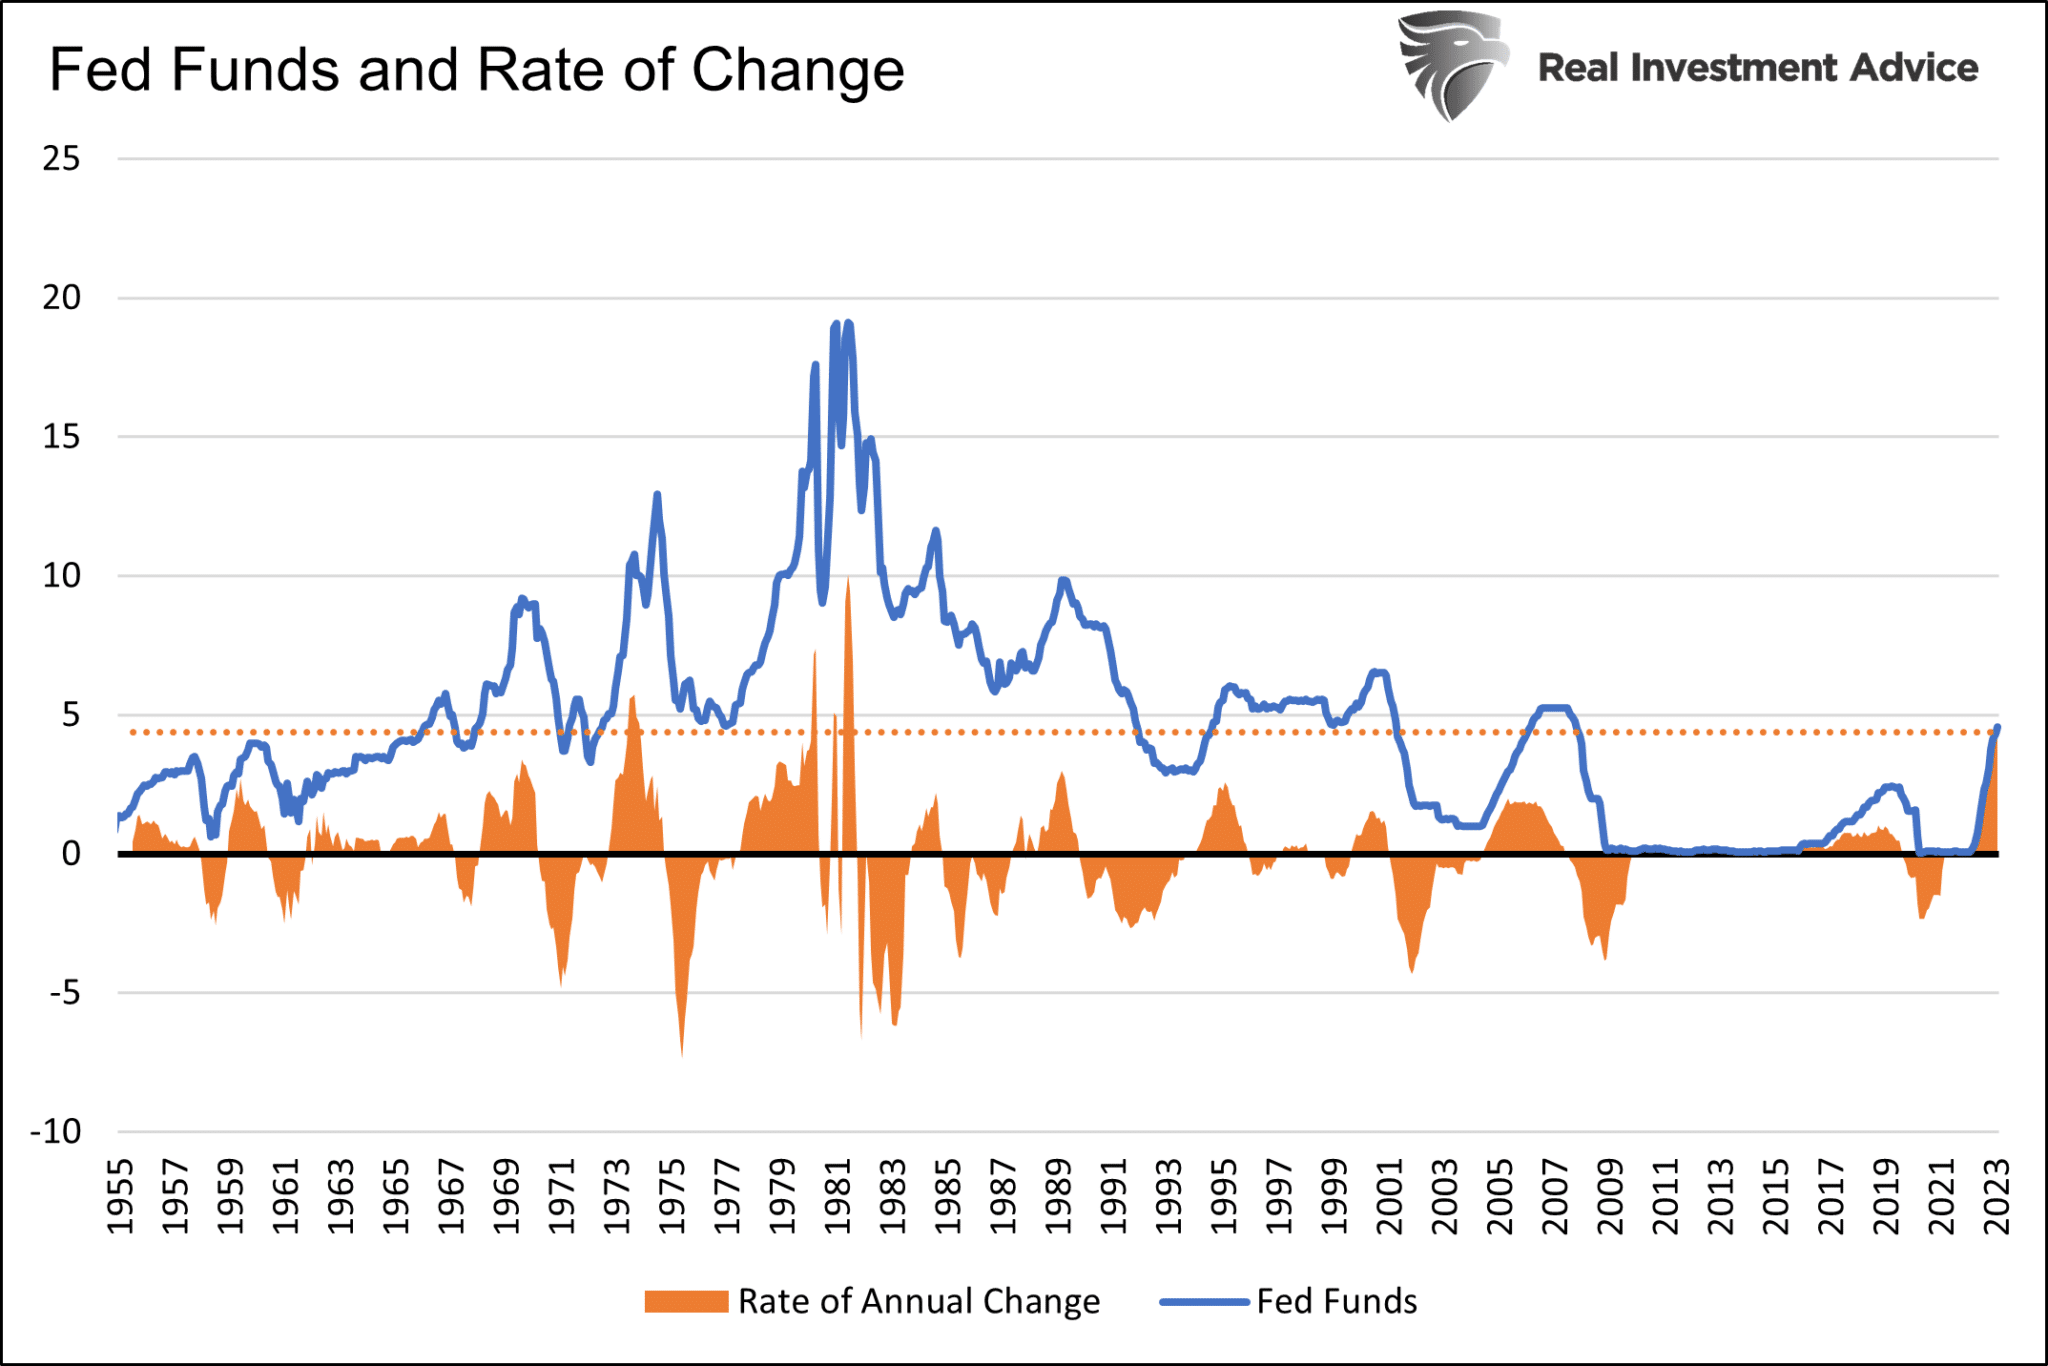 Fed Funds and Rate of Change